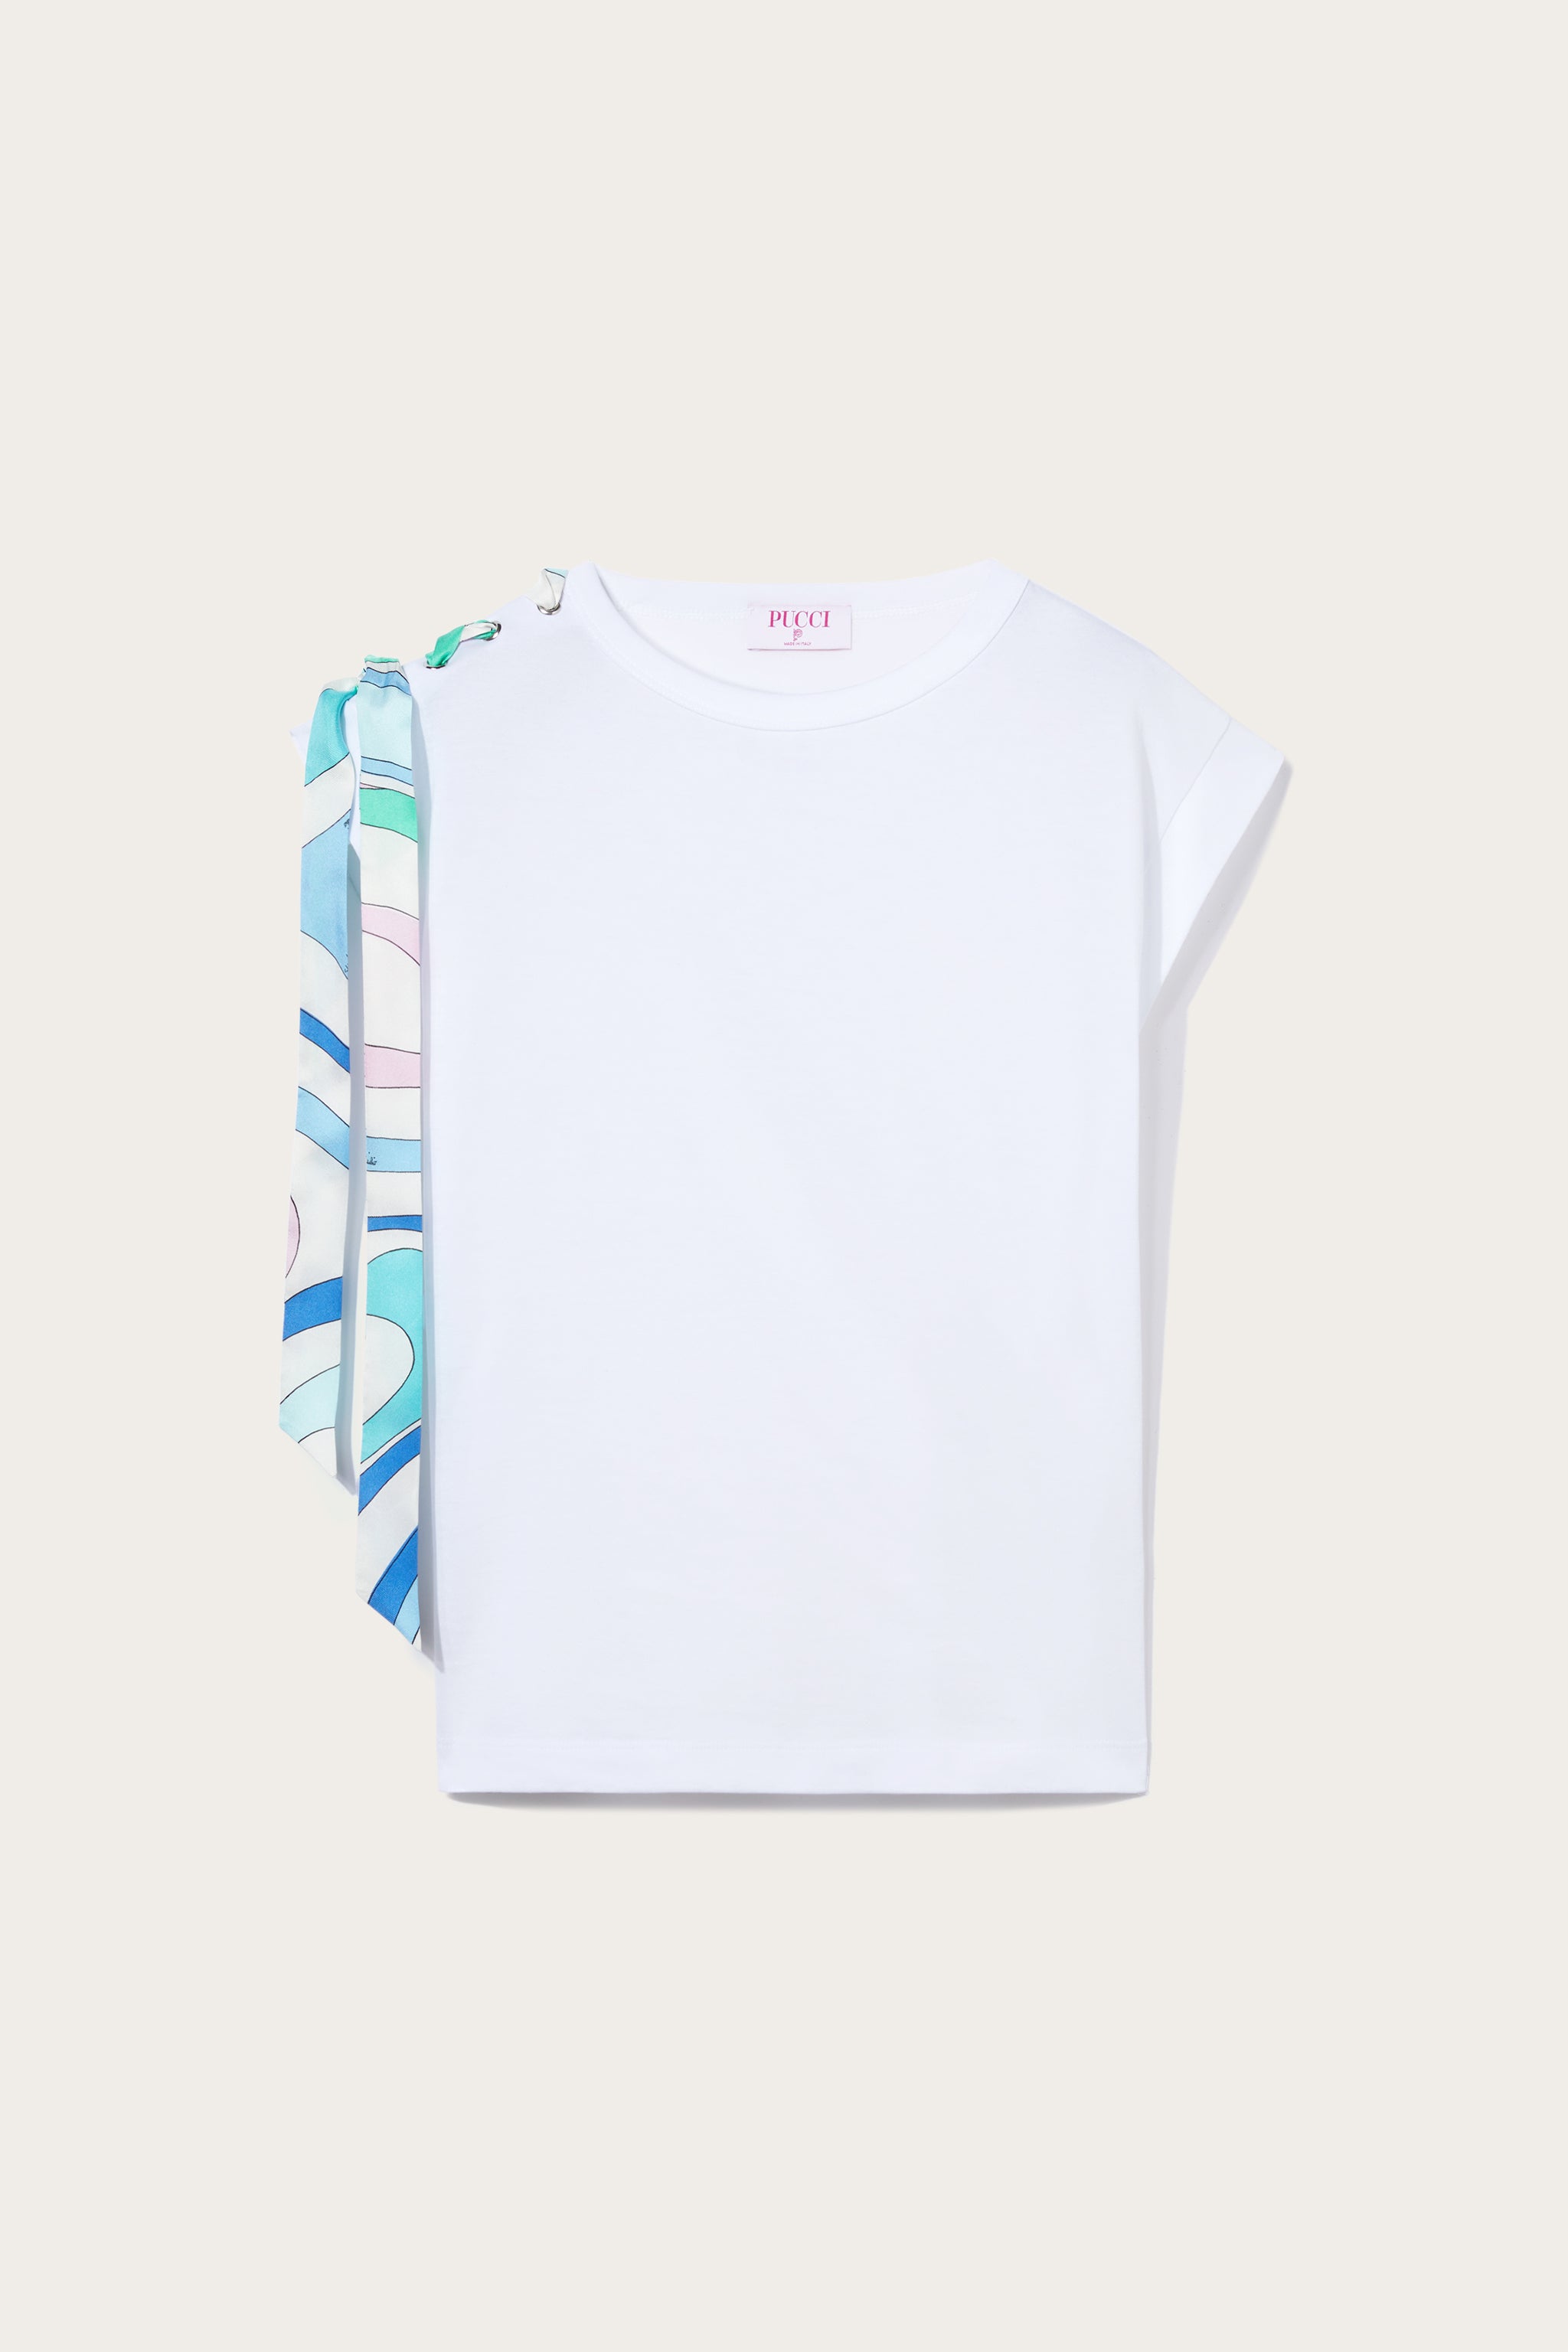 Pucci tshirt & sweatshirt: our collection | Pucci